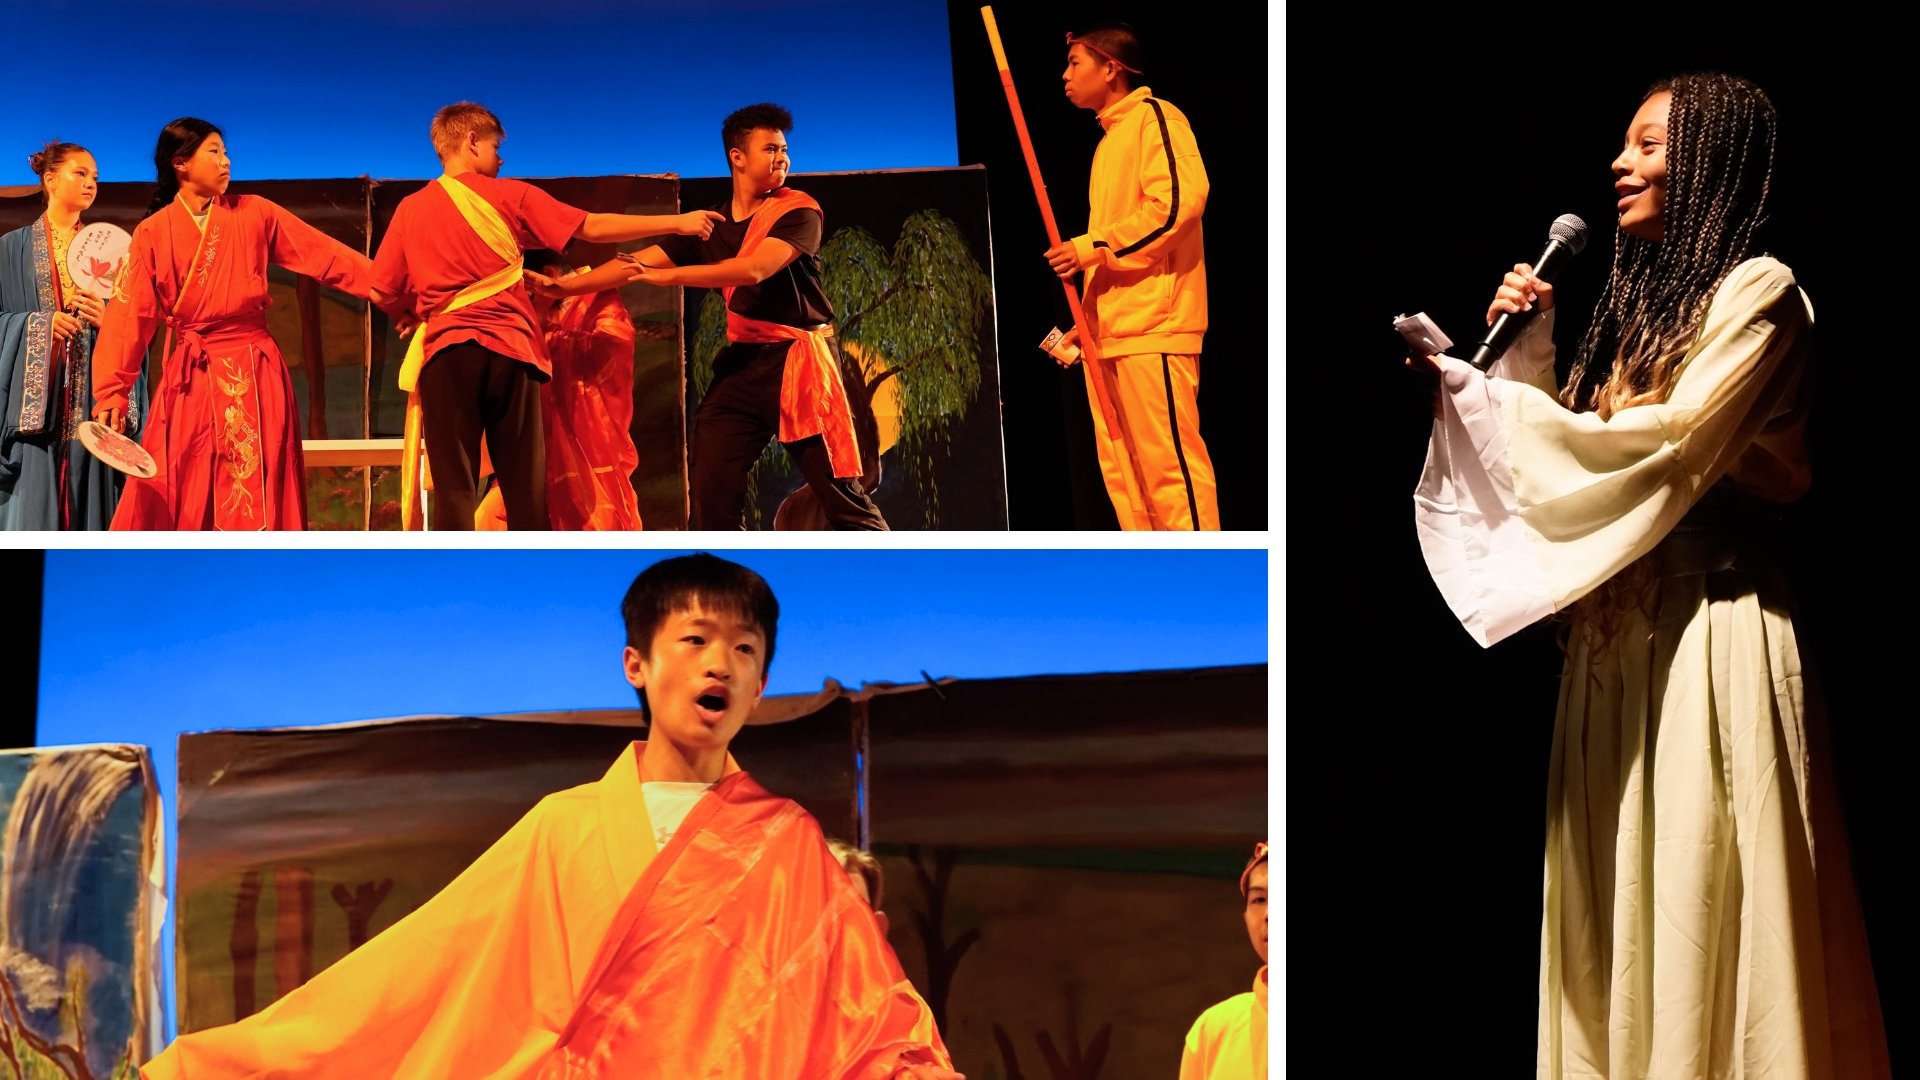 Three photos from the Chinese performance (top left the group on the journey, bottom left the monk, right the introductory speech)